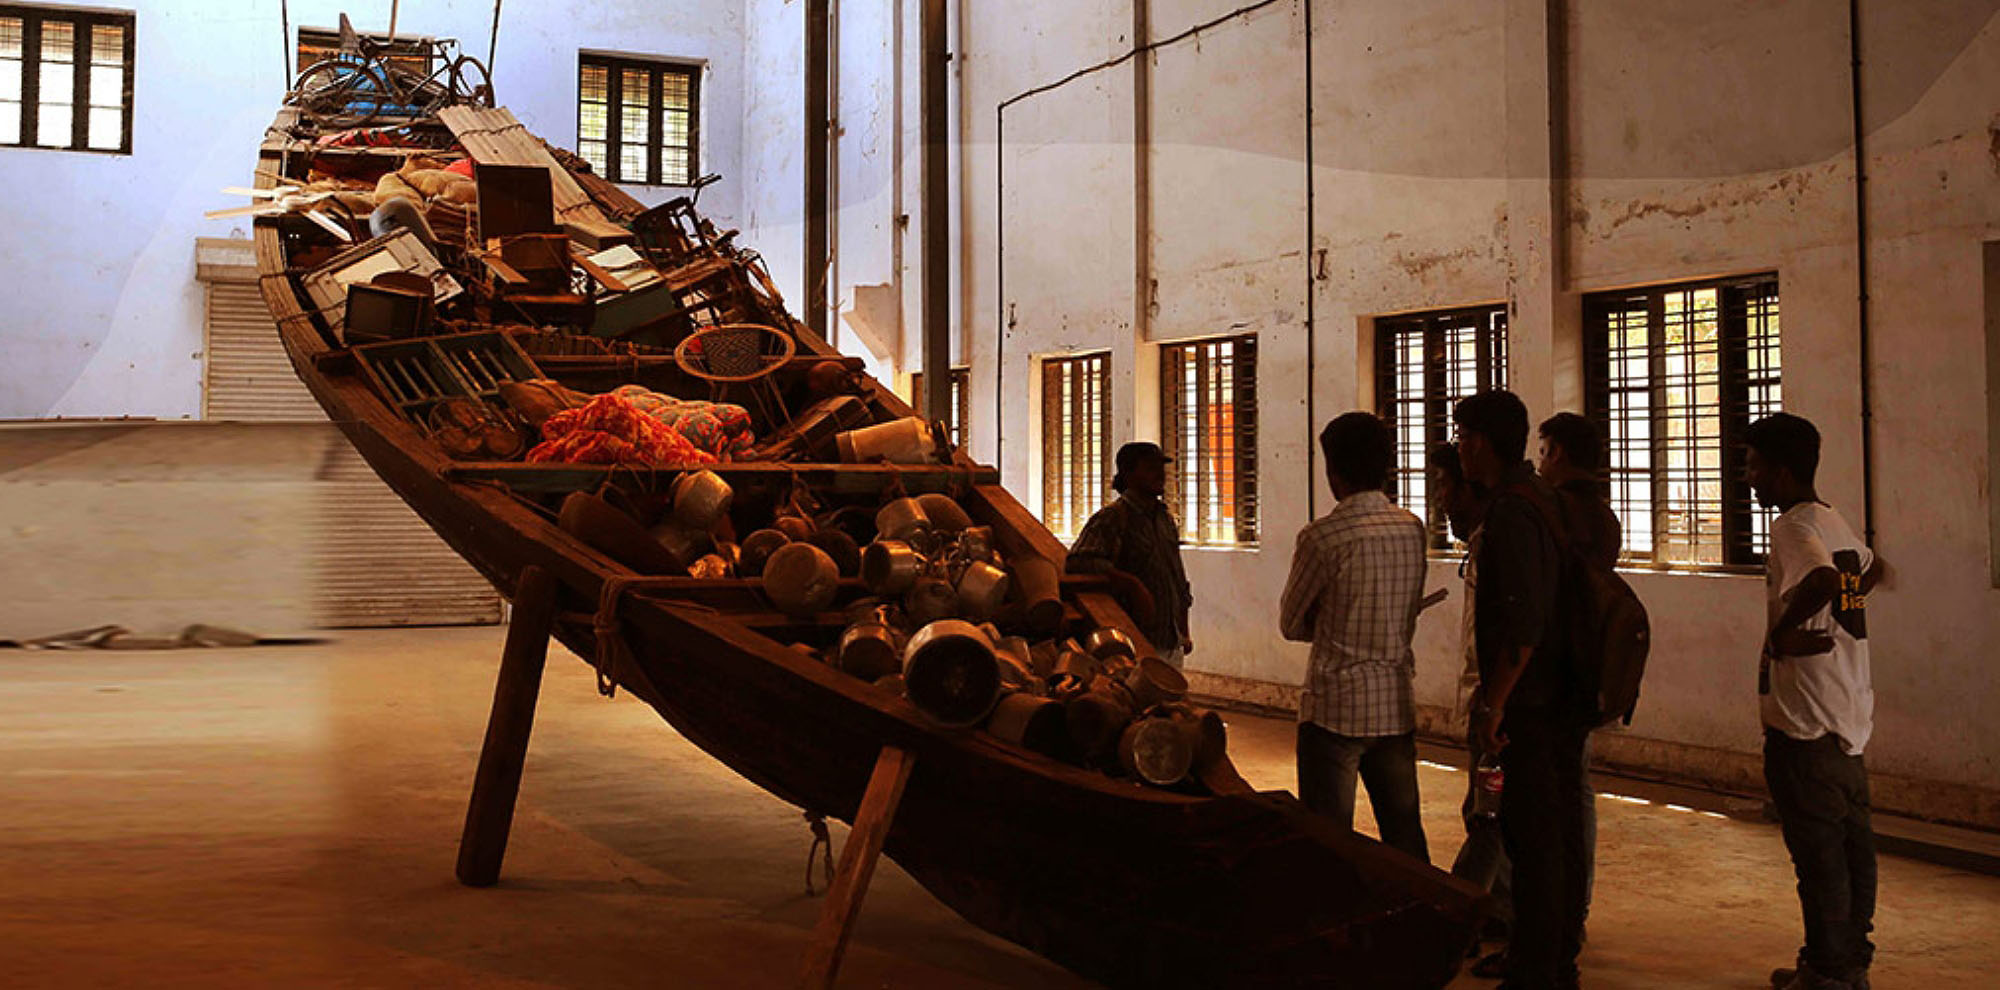 A boat filled with various objects was lifted higher and placed in a large room with a group of men chatting beside it.